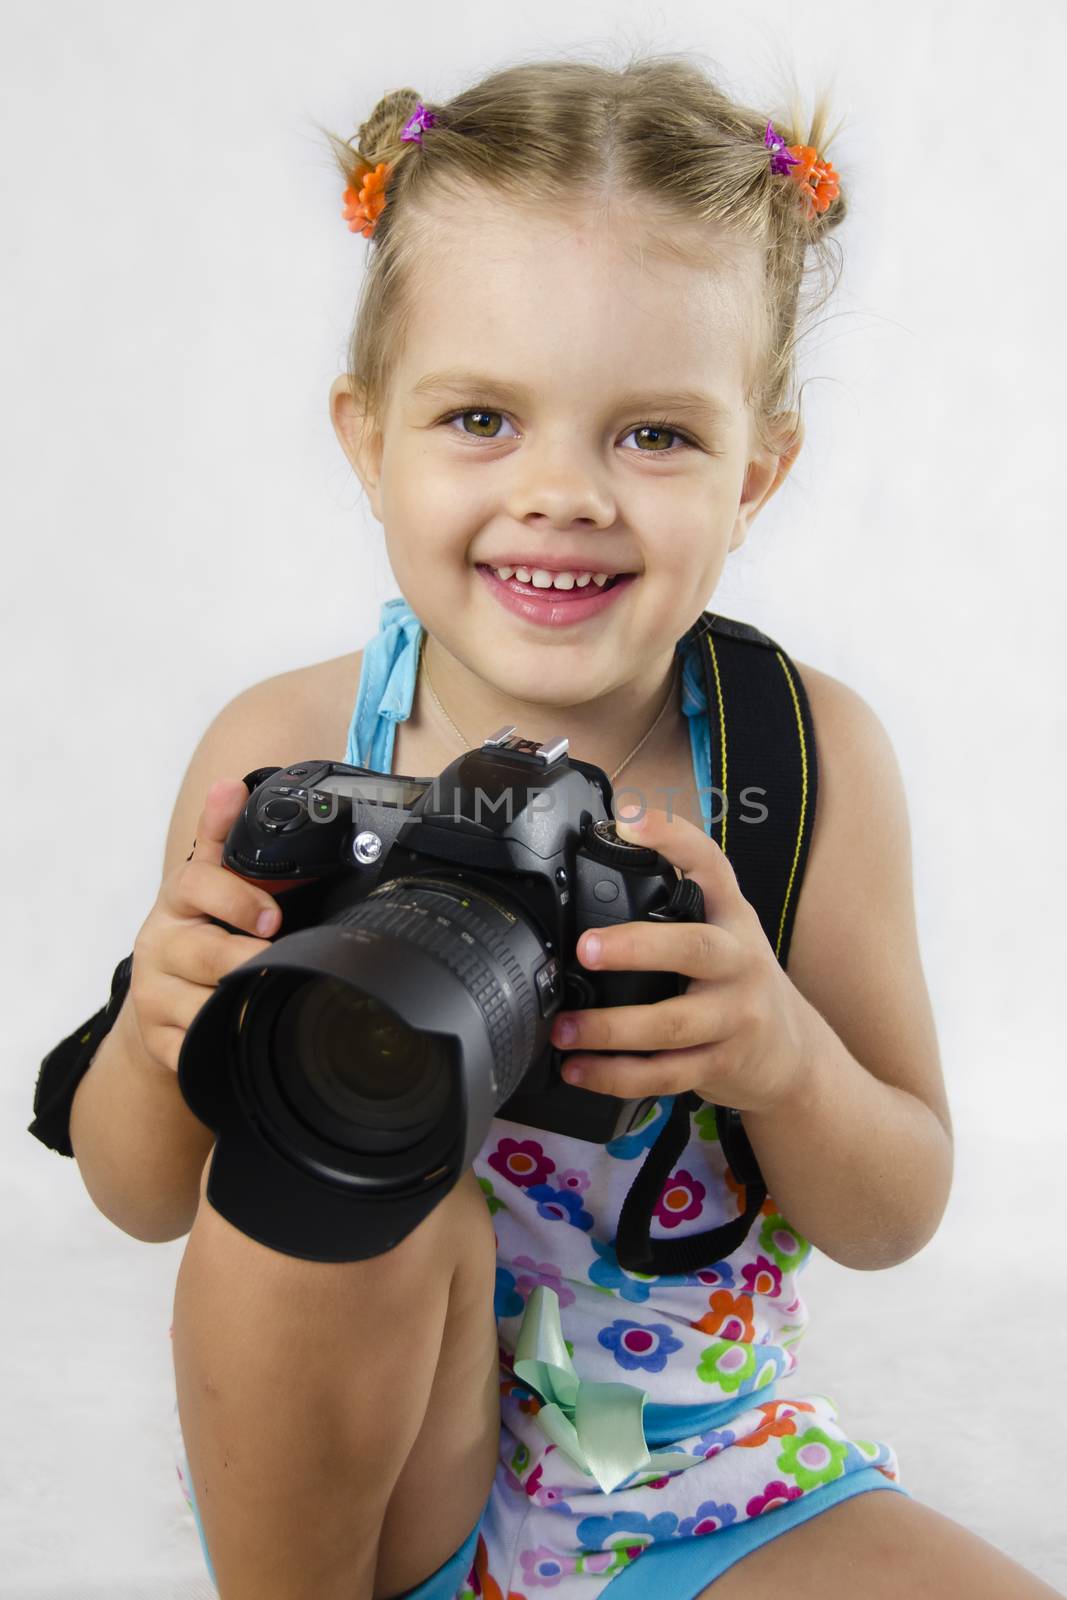 A merry girl keeps SLR camera. child rejoices, for the first time entrusted to hold the camera. The white background